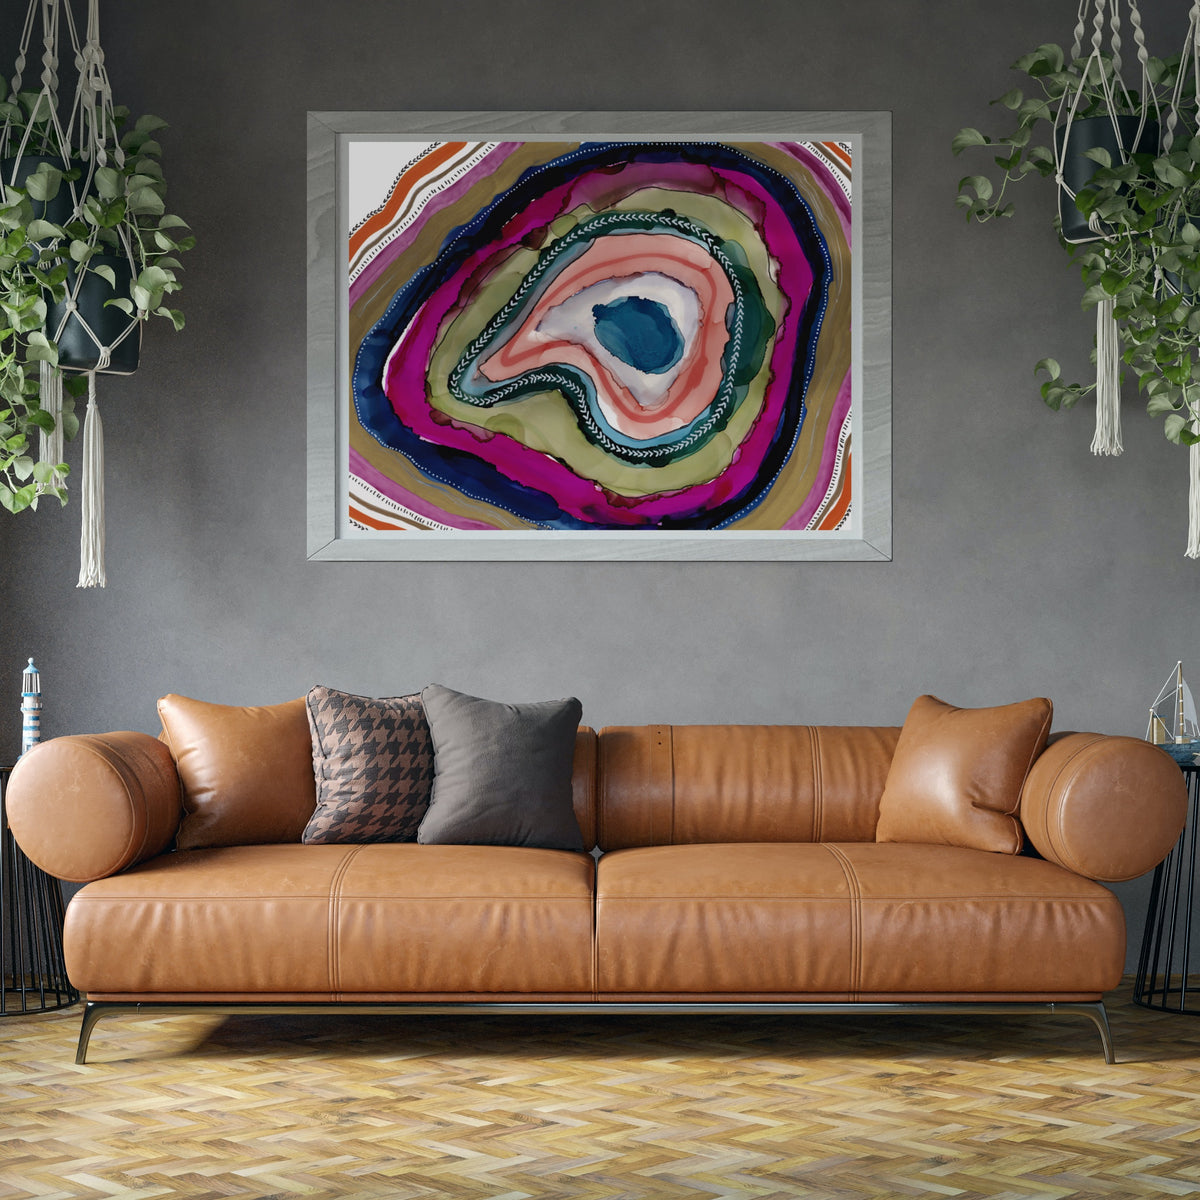 Agate Slice Geode Abstract Painting Art Print Red Gold Magenta-Abstract Art Prints- by Stephanie Rowan - Lake and River Studio